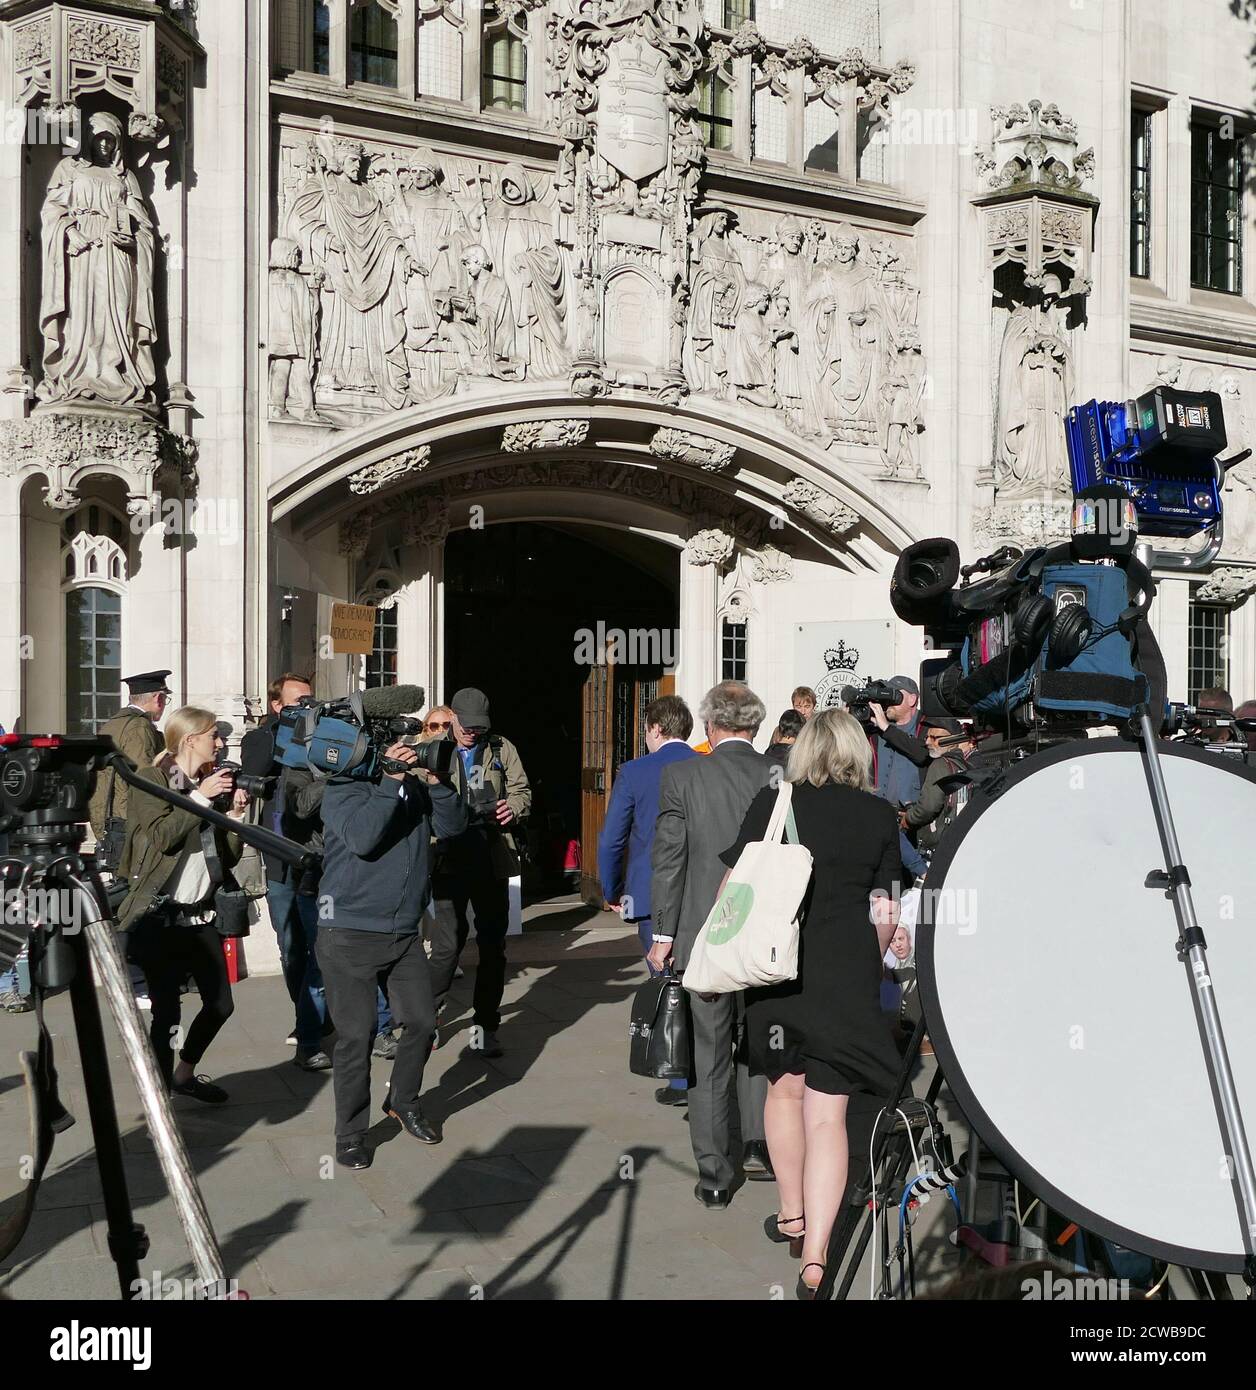 Government legal team arrive at the Supreme Court in London to defend against the legal challenge to the Prorogation of Parliament , by Gina Miller. 17th Sept 2019.the prorogation of the Parliament, was ordered by Queen Elizabeth II upon the advice of the Conservative Prime Minister, Boris Johnson, on 28 August 2019. opposition politicians saw this as an unconstitutional attempt to reduce parliamentary scrutiny of the Government's Brexit plan. Gina Nadira Miller is a Guyanese-British business owner and activist who initiated the 2016 R v Secretary of State for Exiting the European Union court Stock Photo